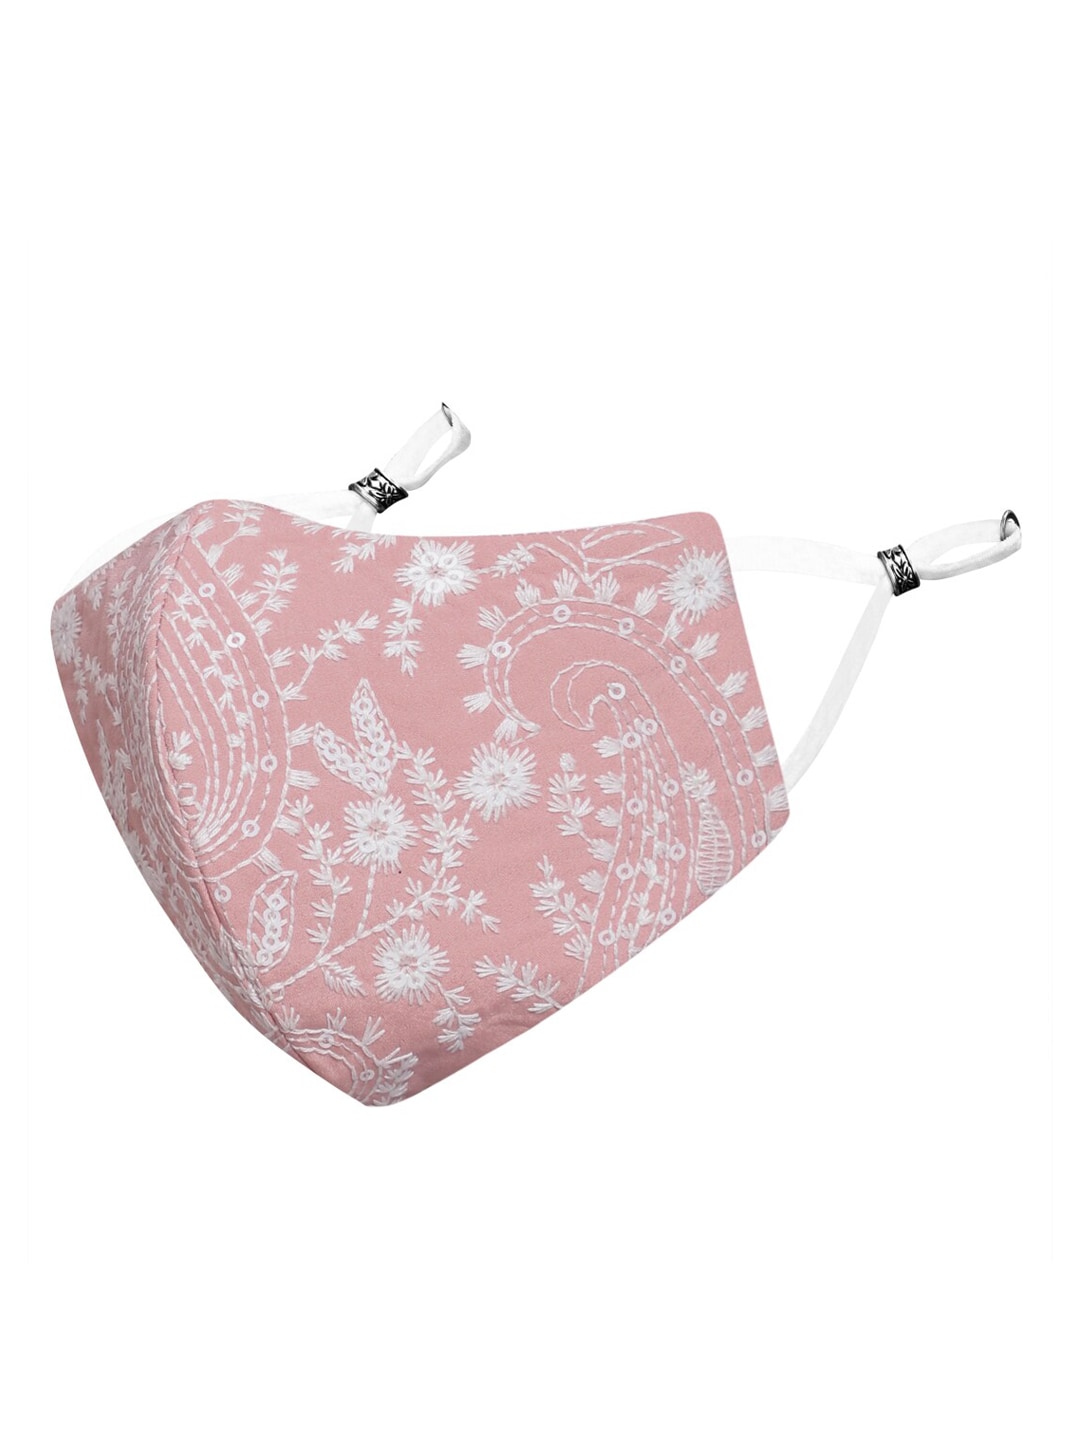 MASQ Pink & White Embroidered 4-Ply Reusable Anti-Pollution Cloth Mask Price in India